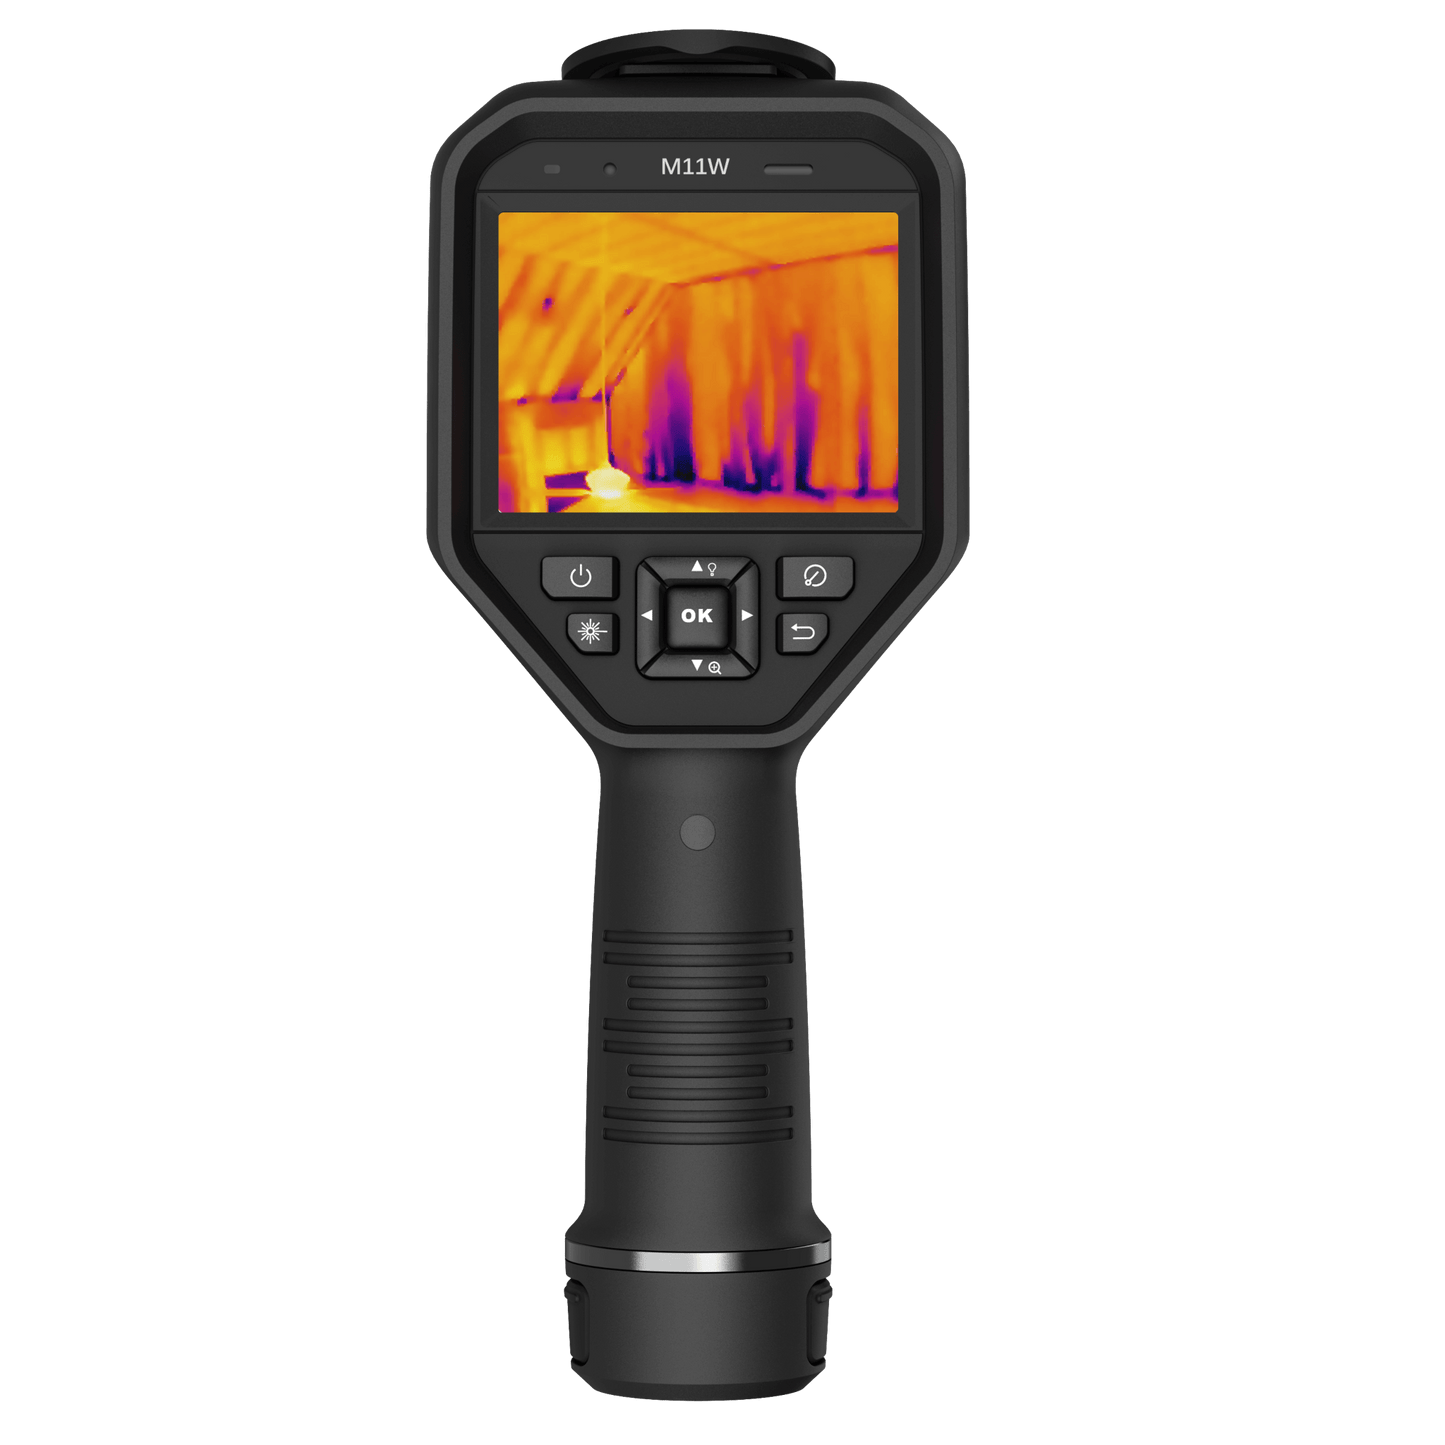 HikMicro M11W Handheld Thermography Camera screen view on a transparent background